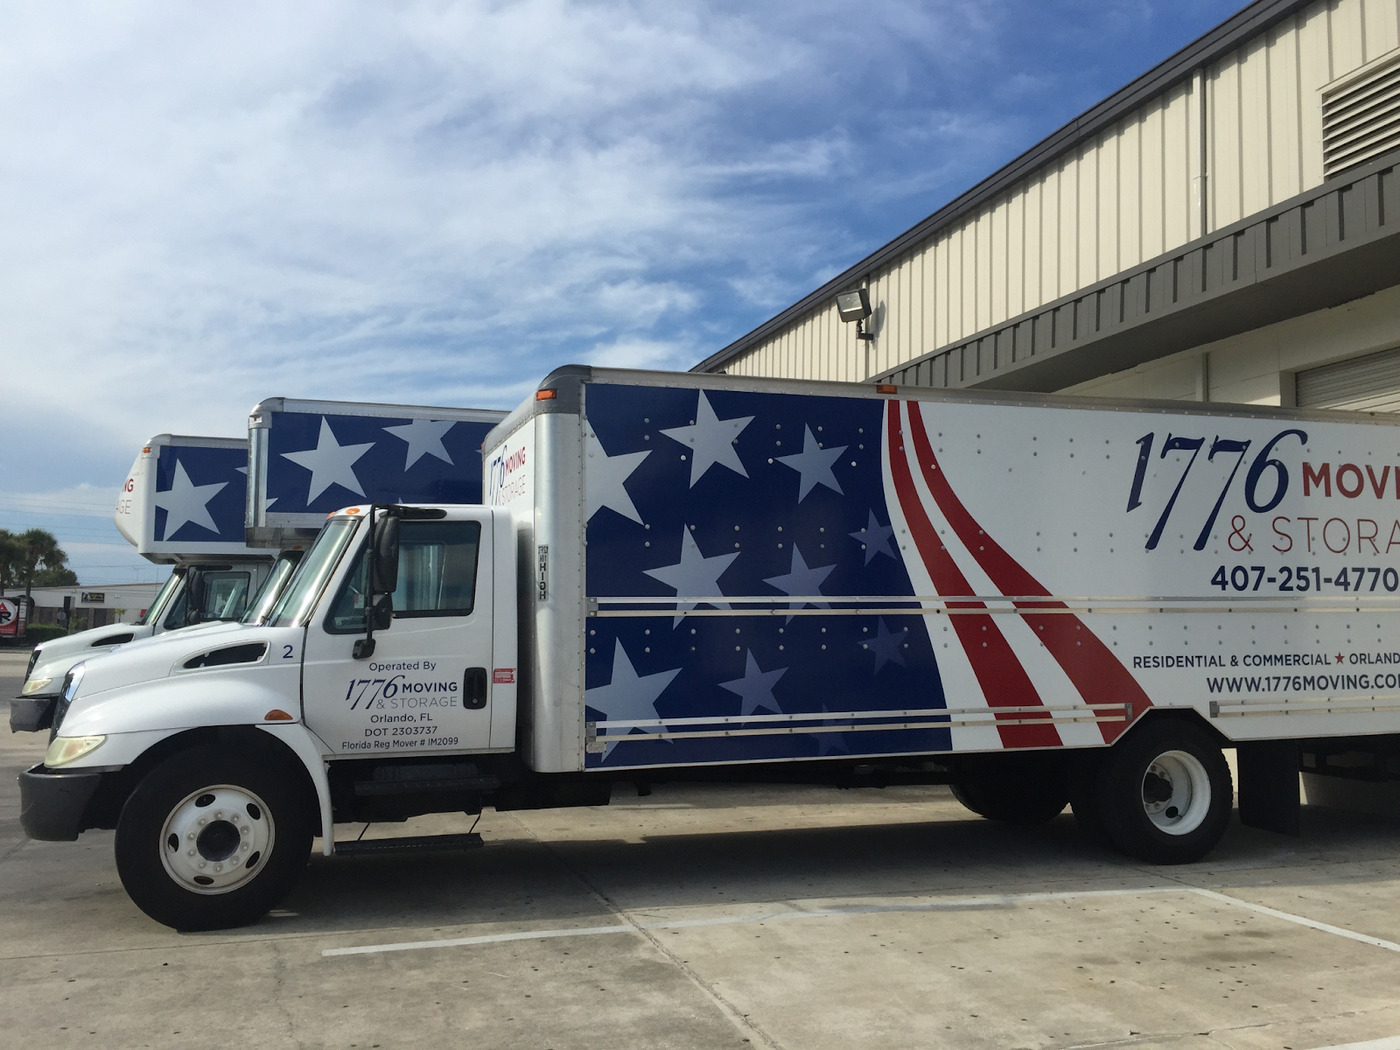 1776 Moving and Storage is a full-service moving company based in Orlando, FL, offering a wide range of services to meet various moving needs.